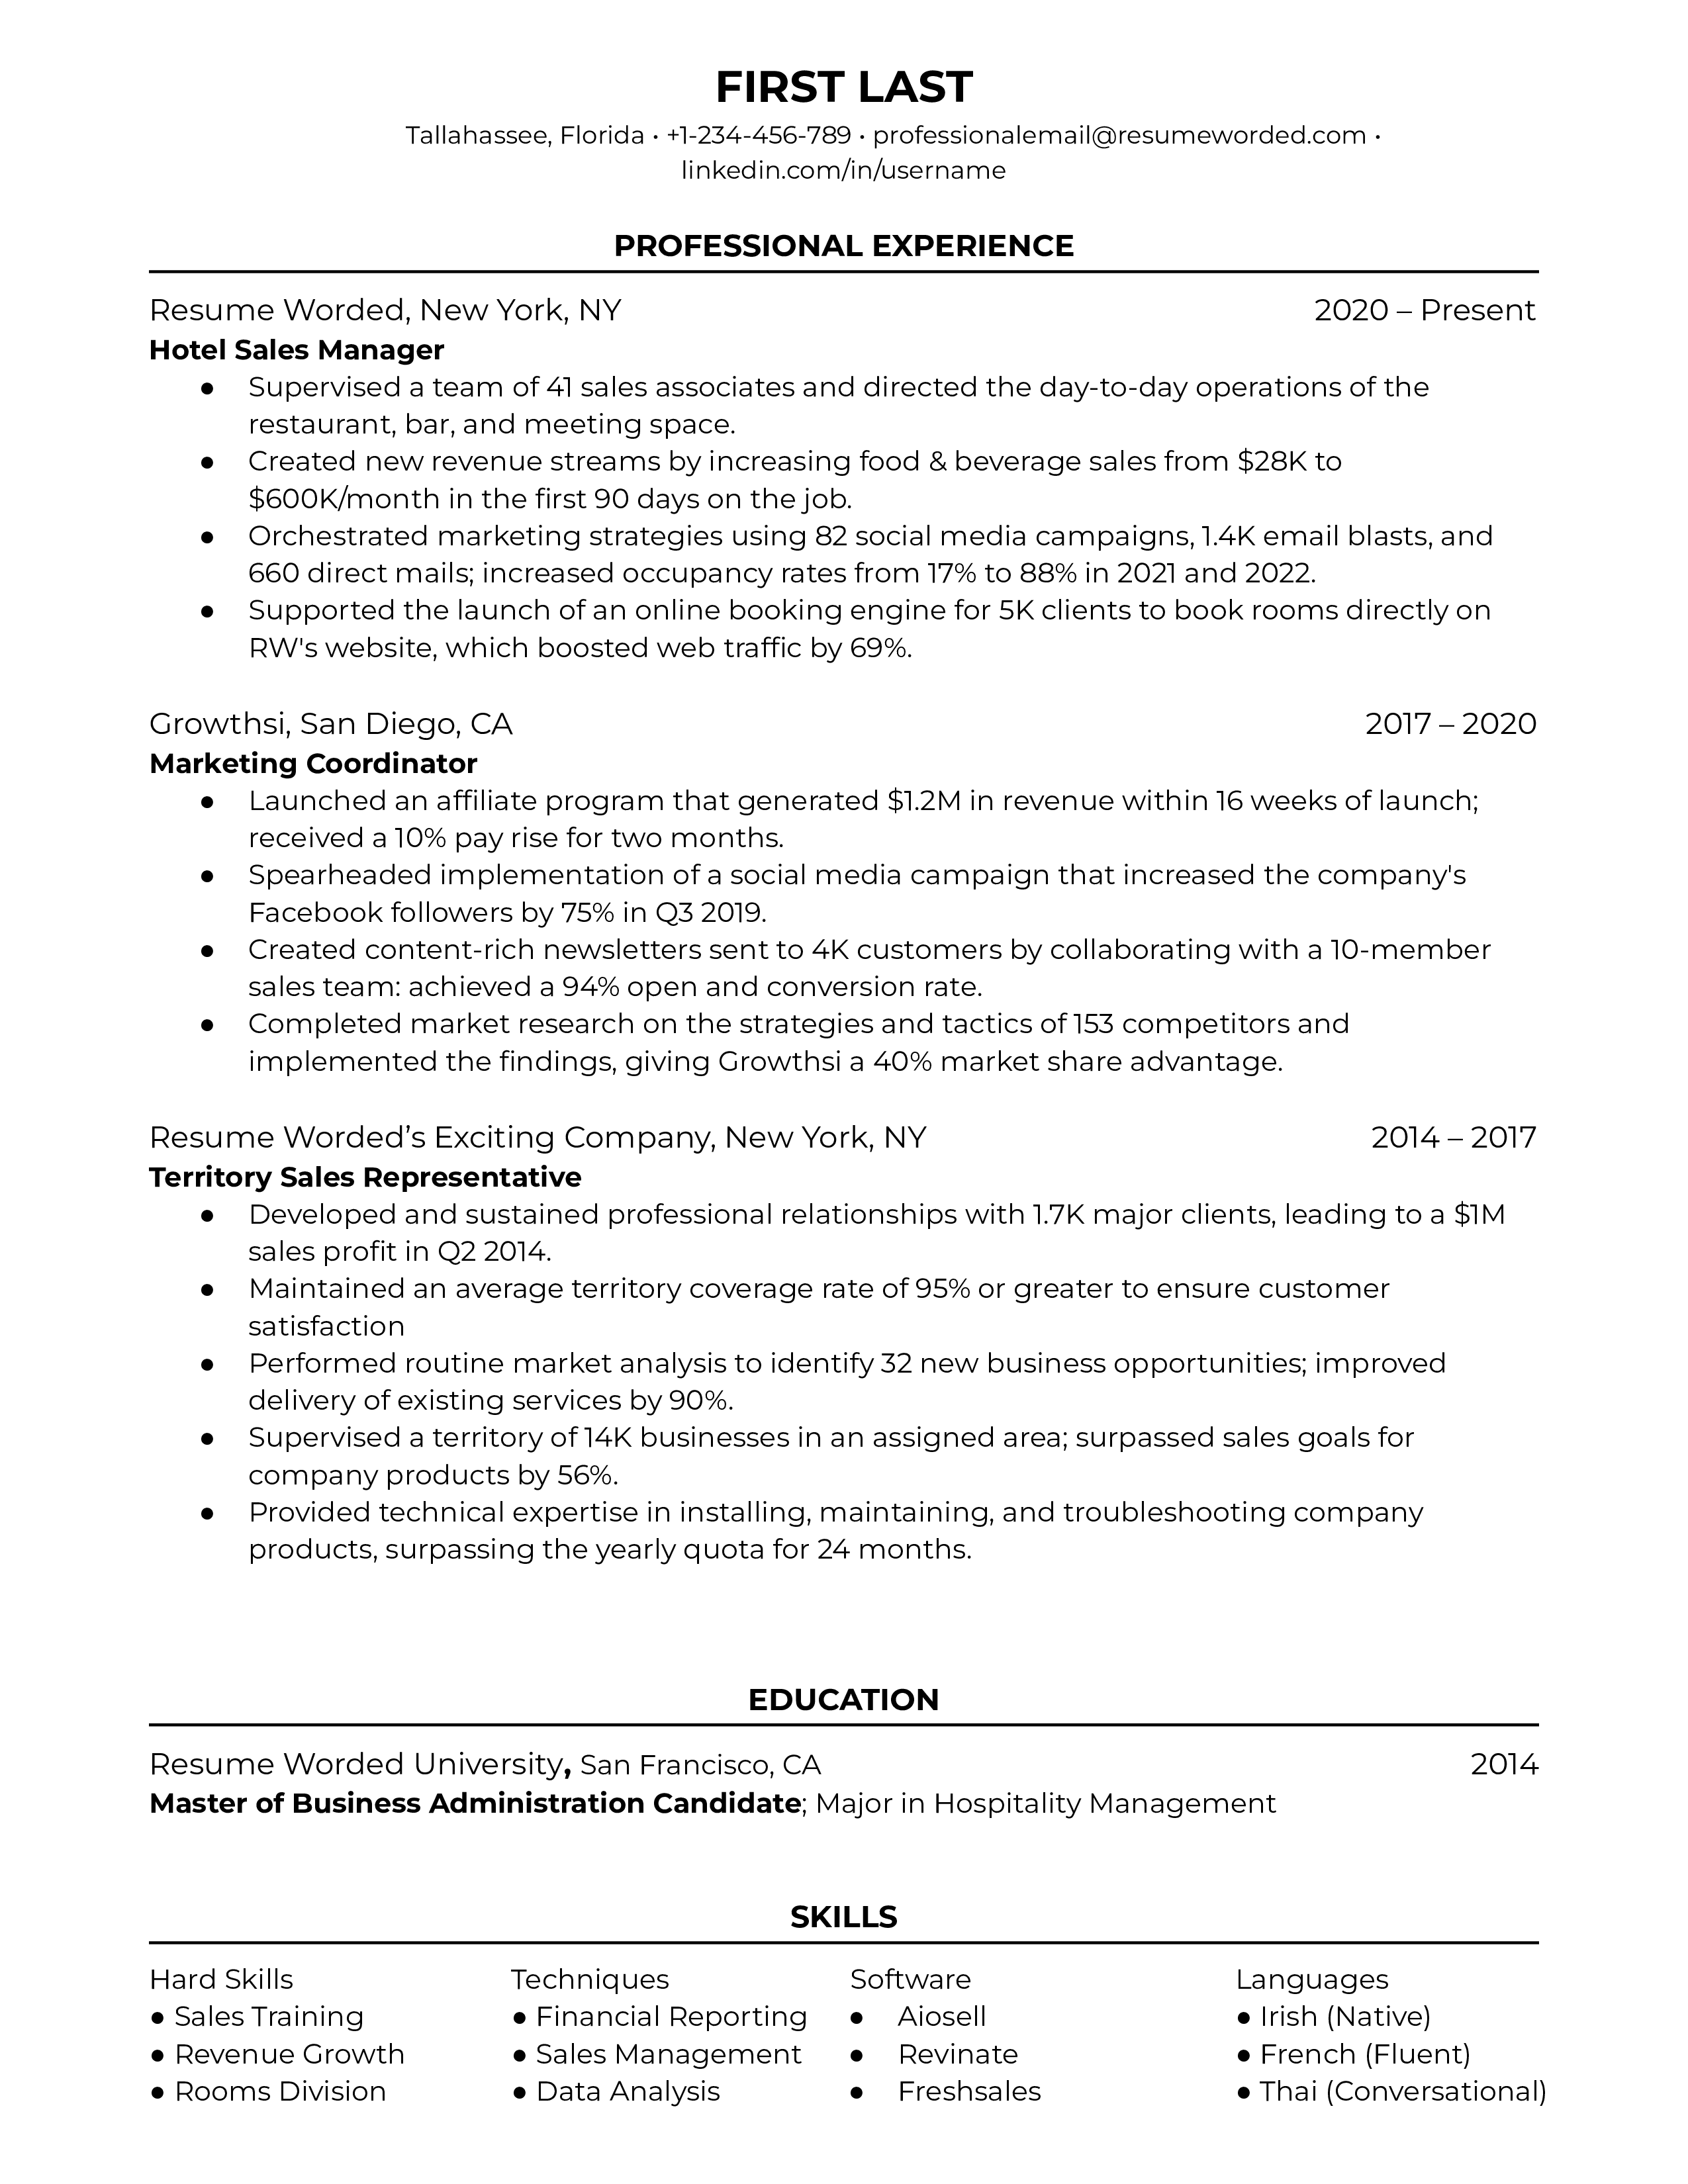 A well-structured CV for a Hotel Sales Manager showcasing industry knowledge and quantifiable achievements.